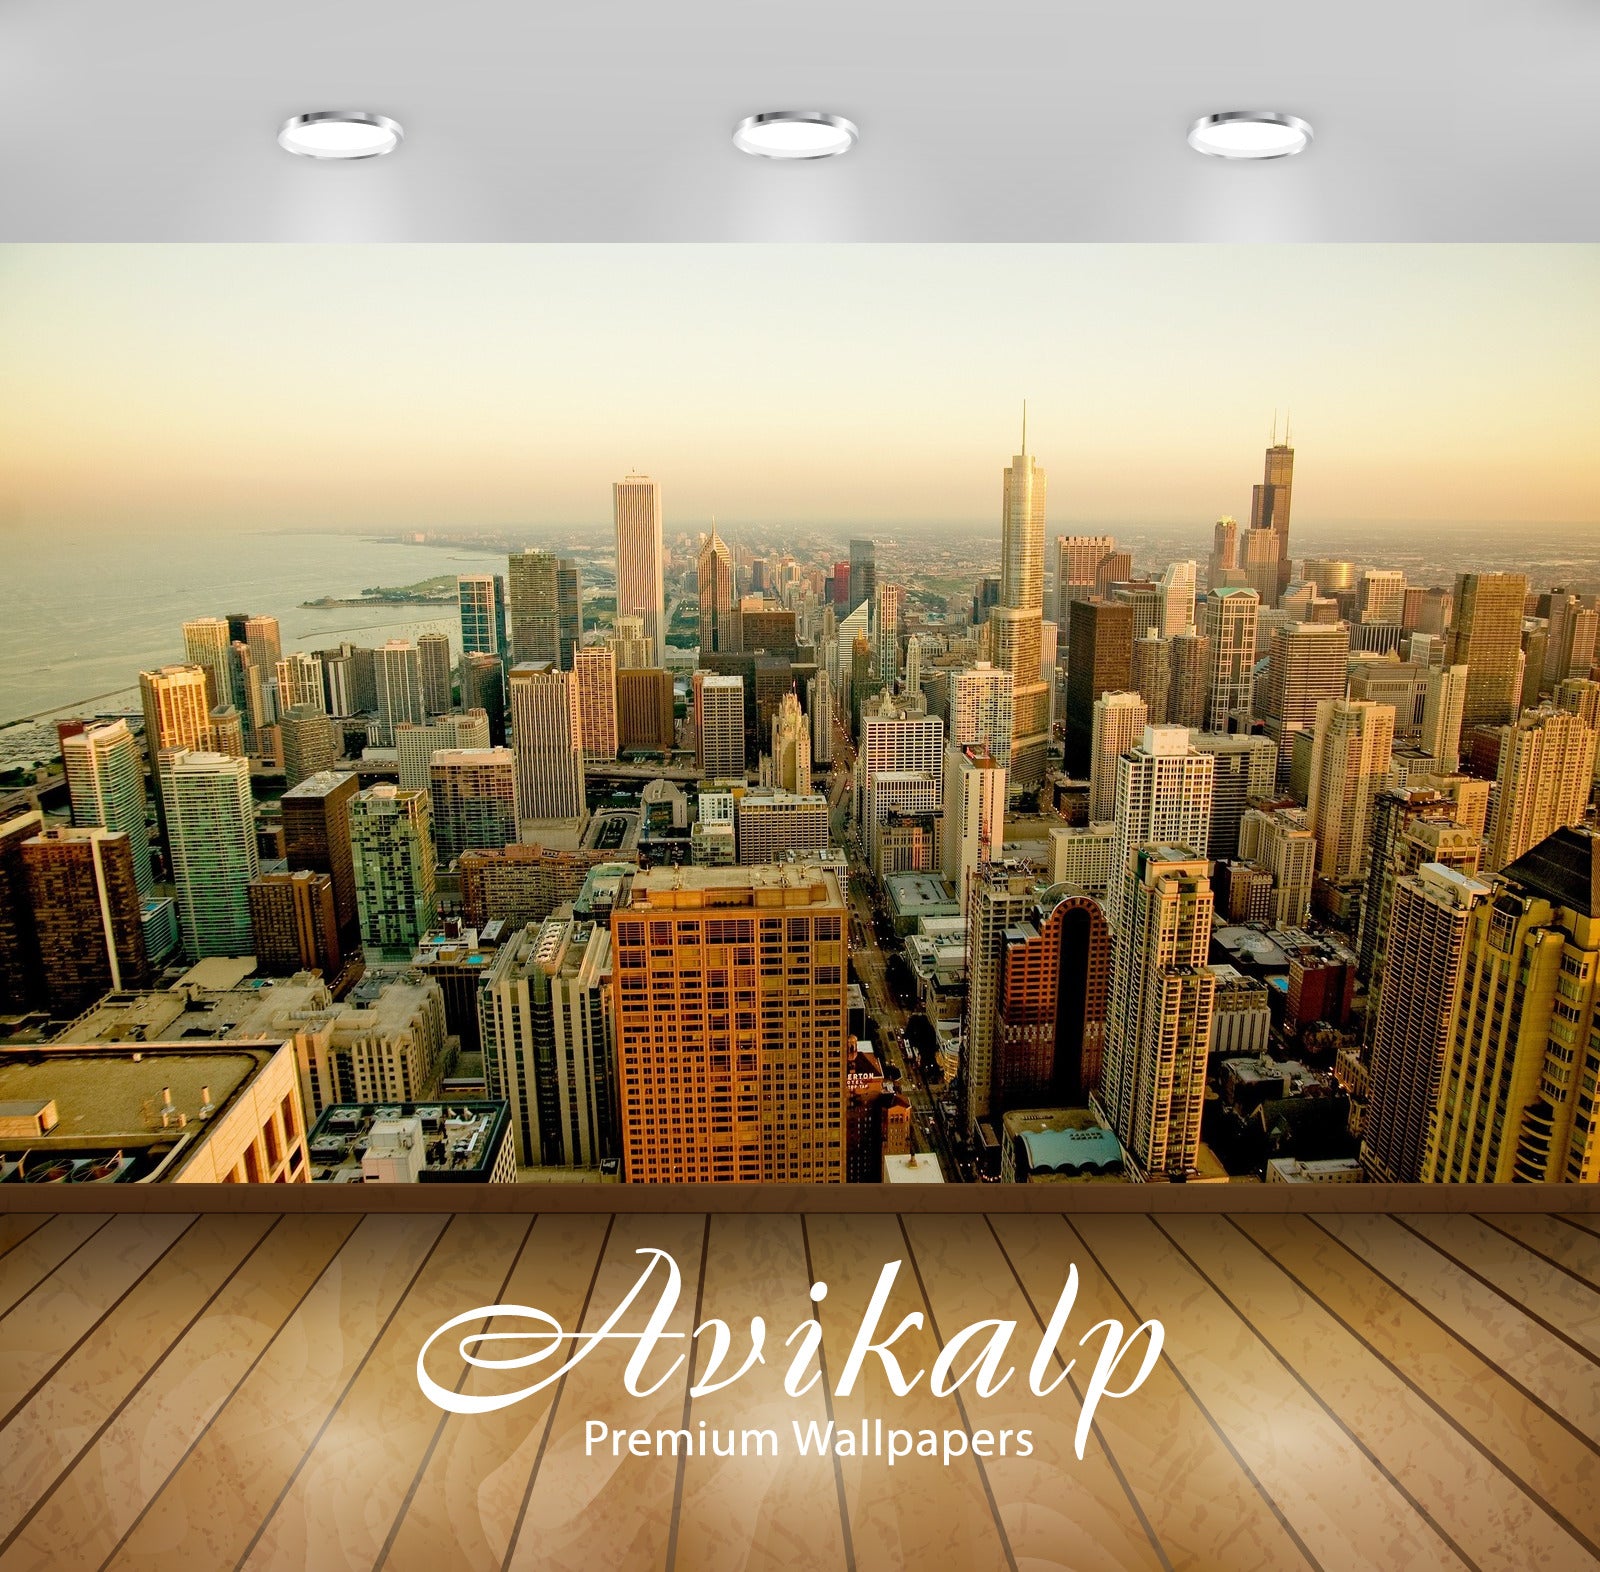 Avikalp Exclusive Awi1557 Chicago City View Full HD Wallpapers for Living room, Hall, Kids Room, Kit